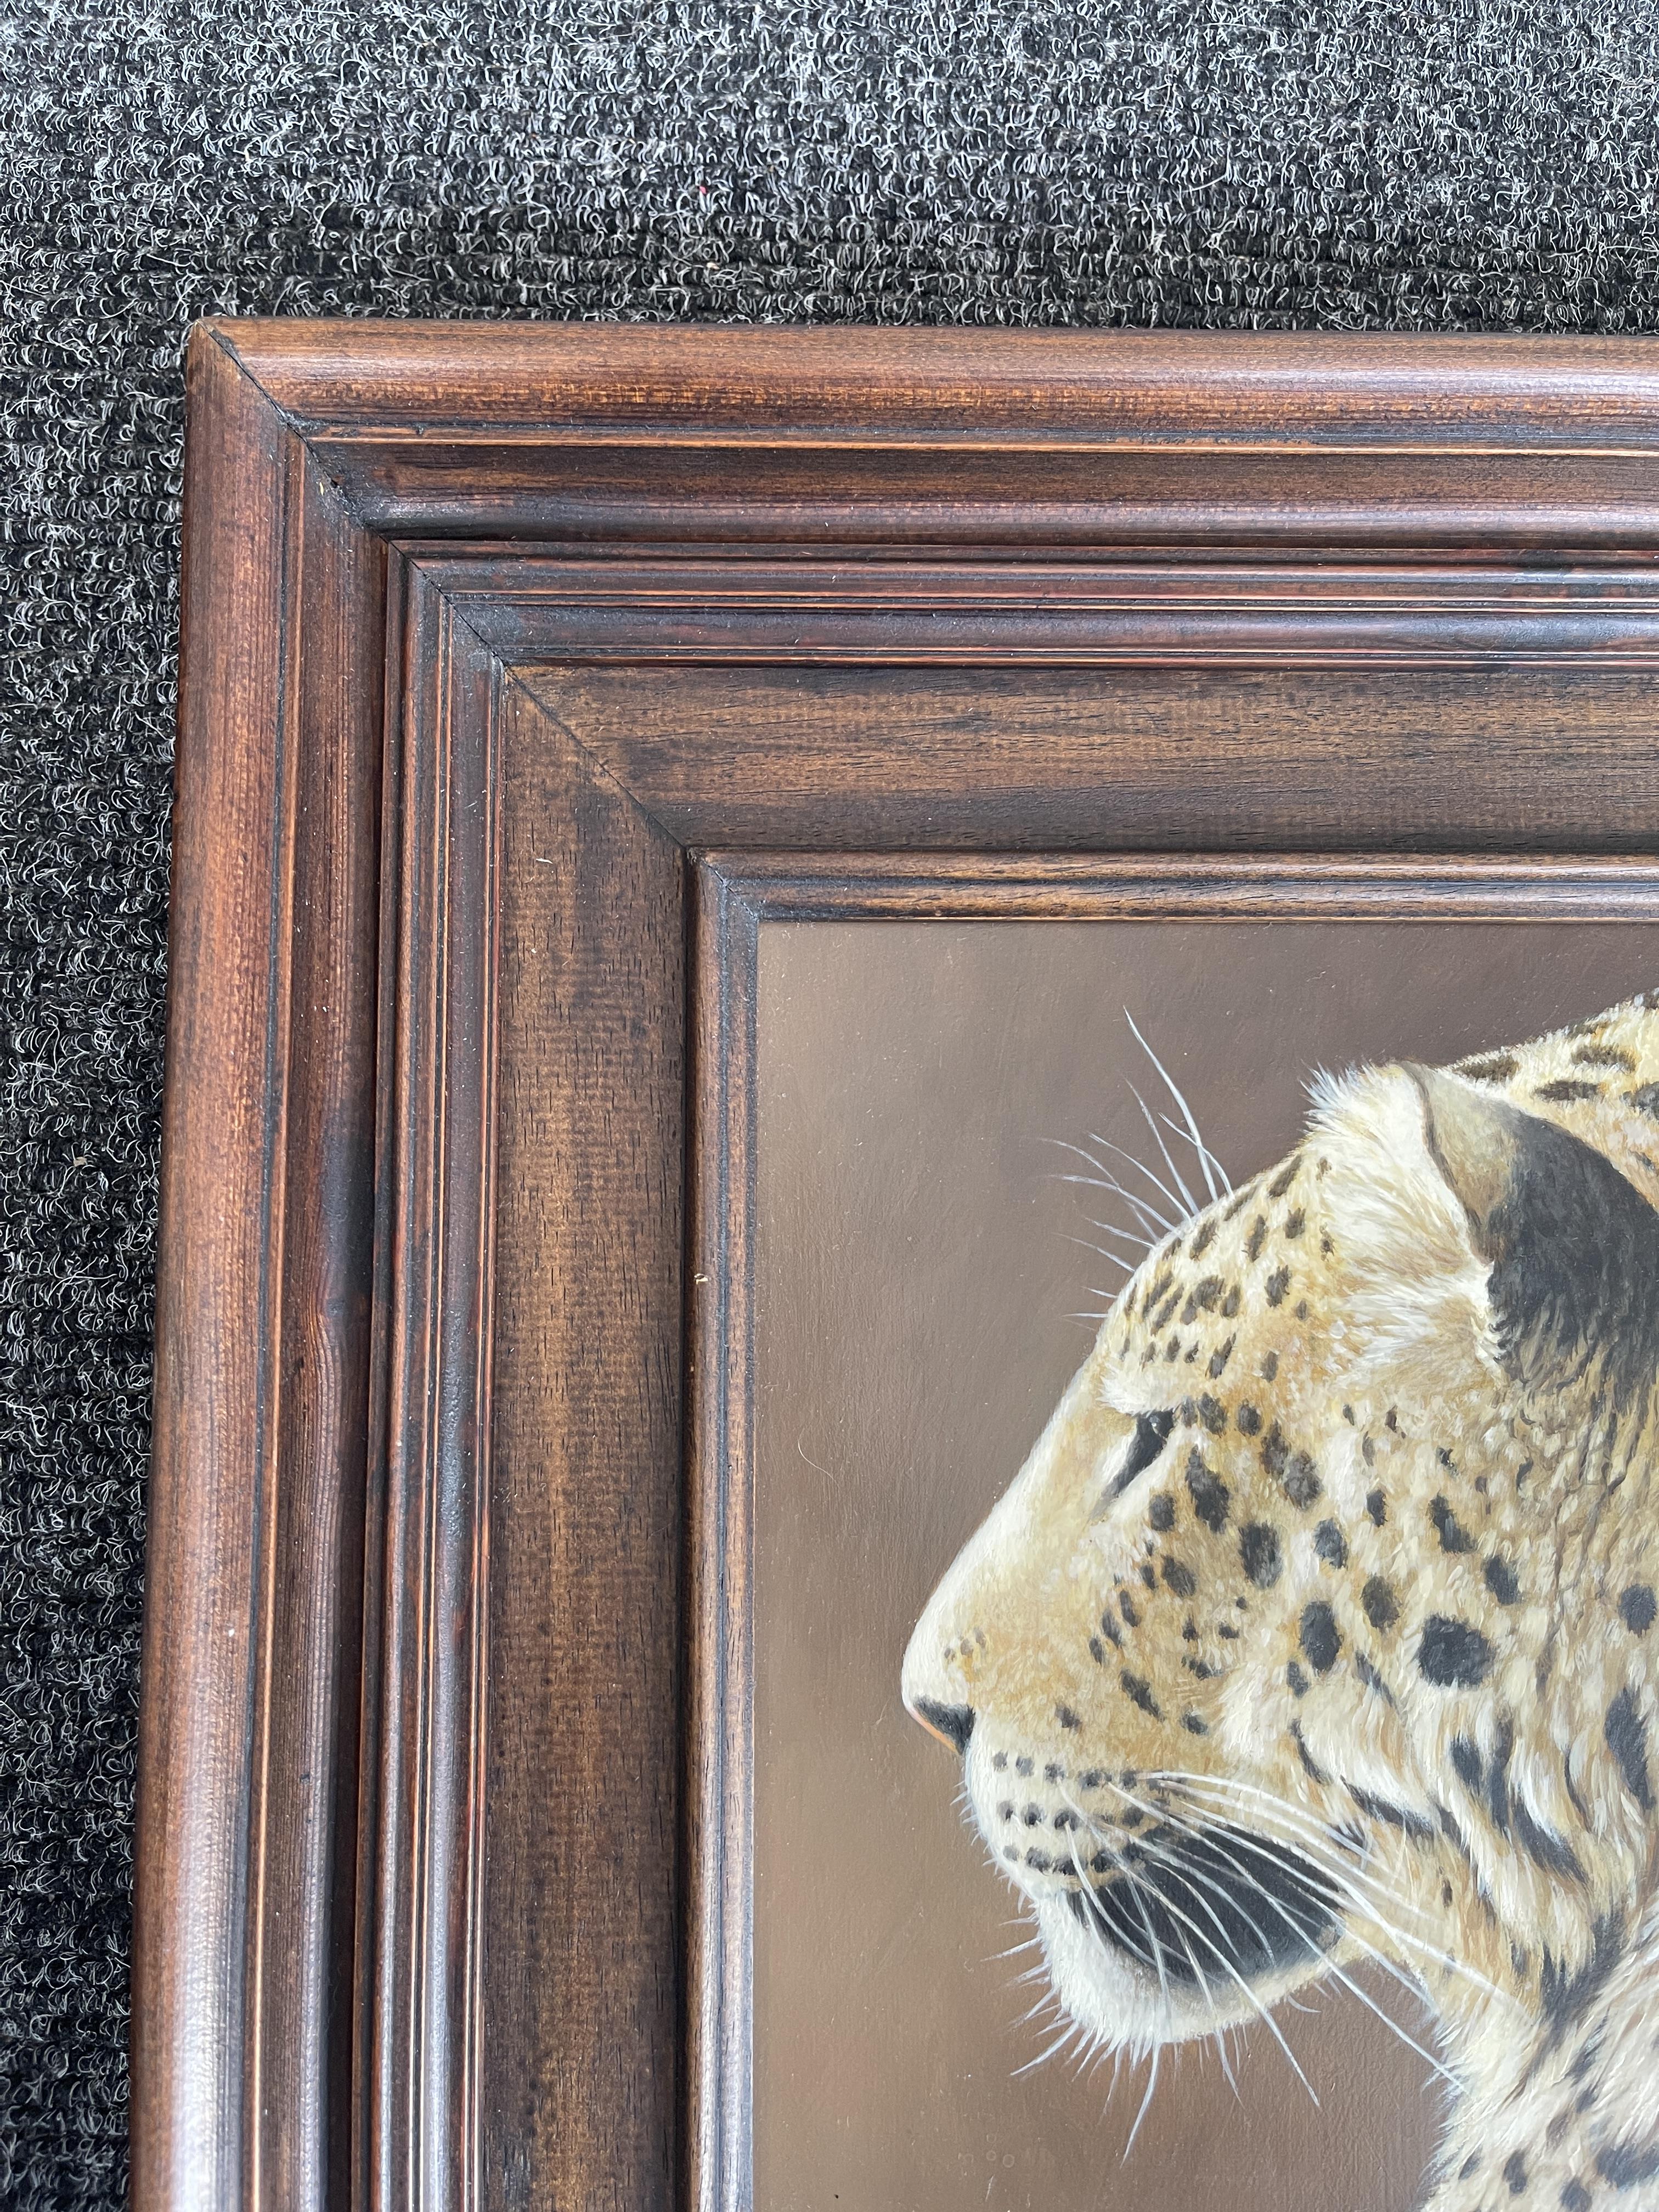 Signed and Framed Oil On Panel - Leopard - by Coli - Image 6 of 22